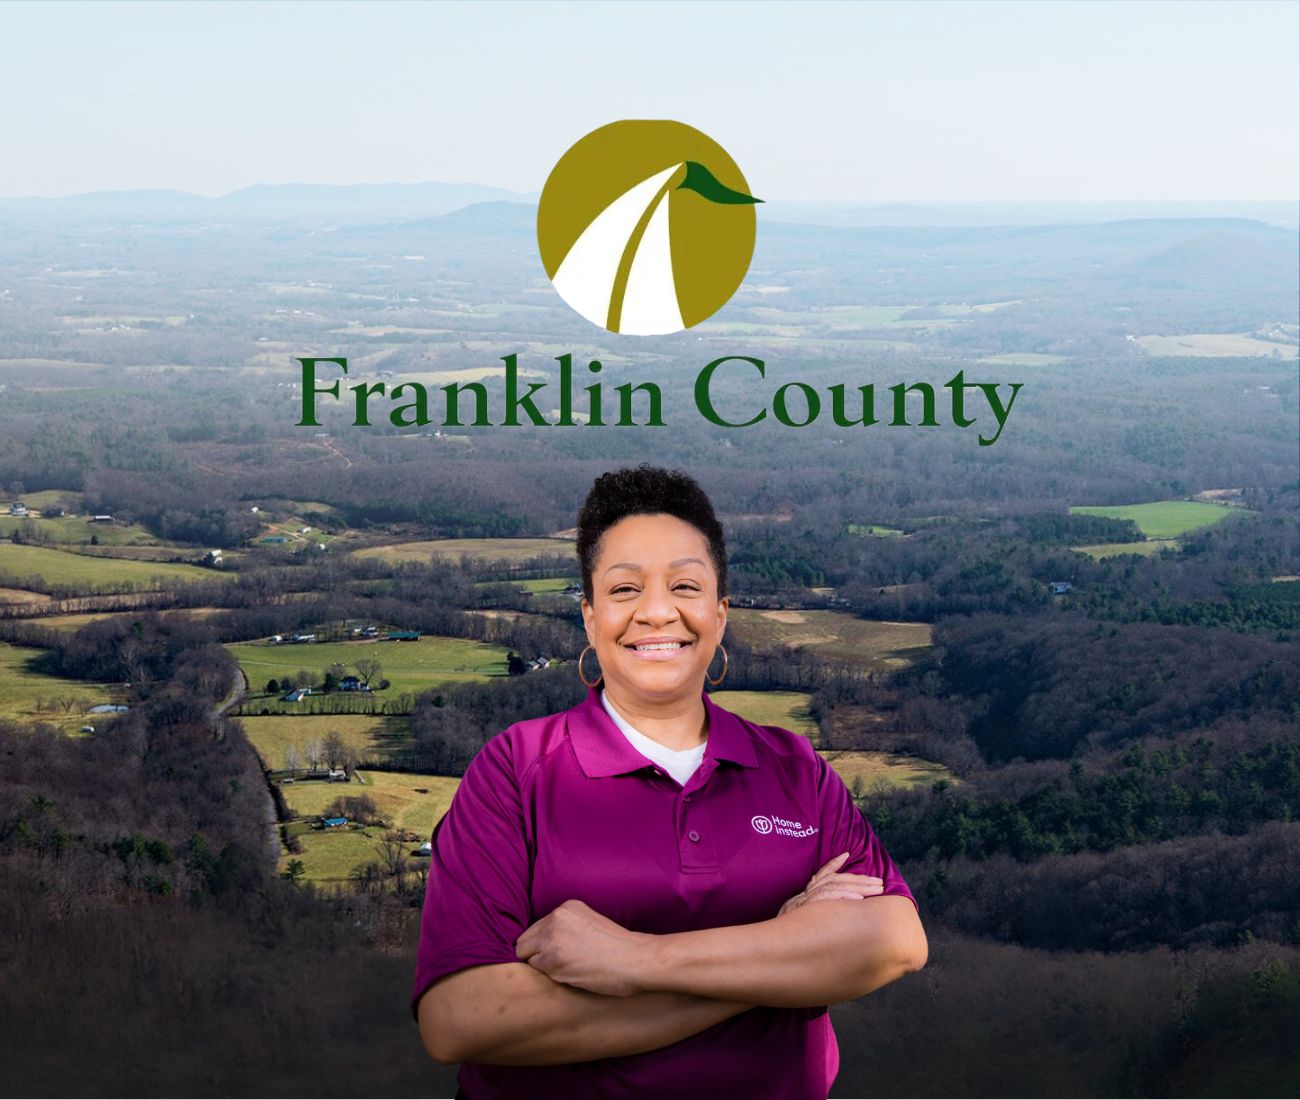 Home Instead caregiver with Franklin County, Virginia in the background